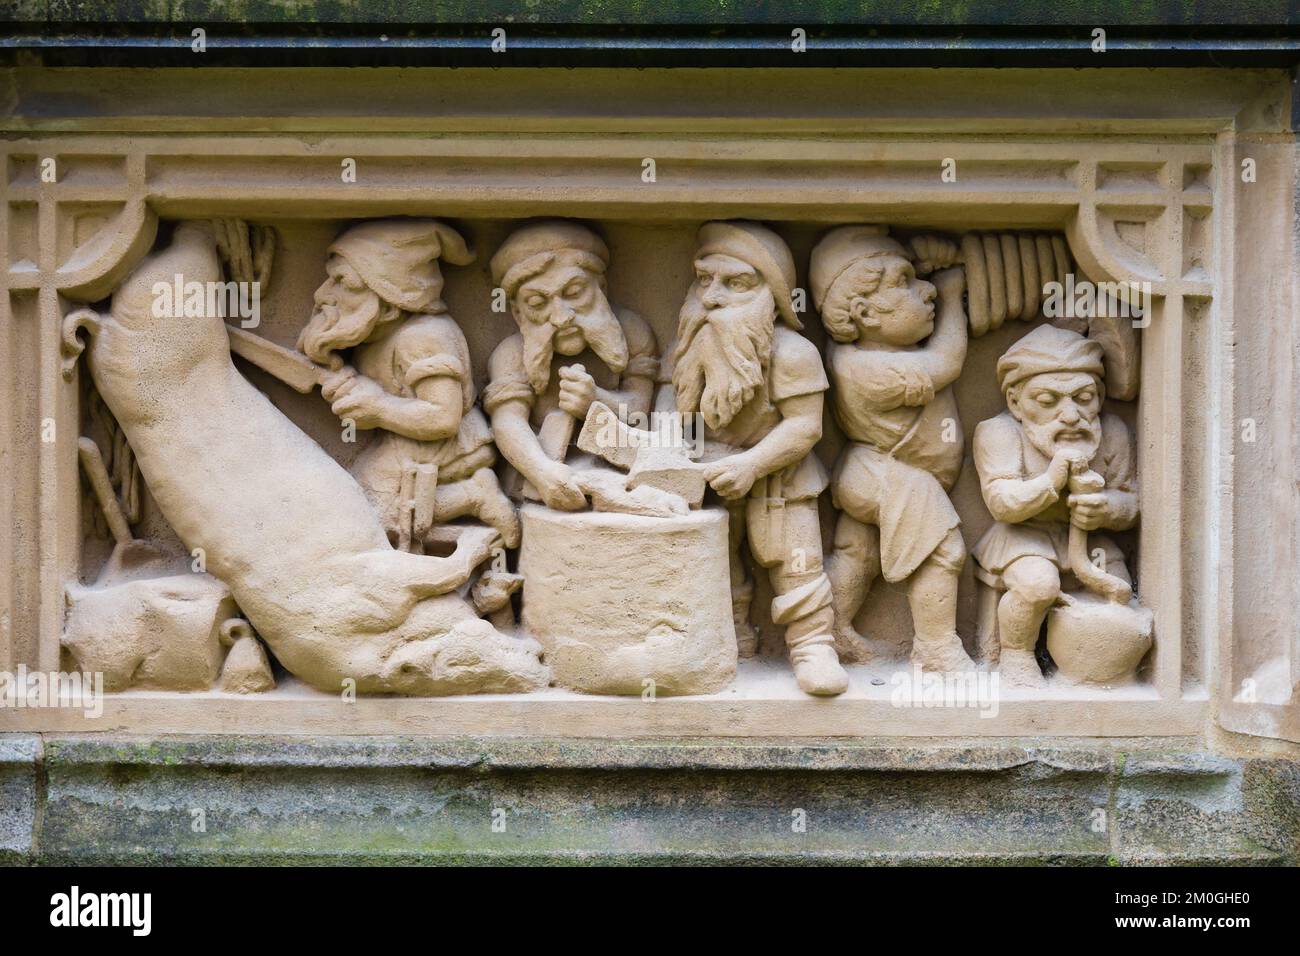 Heinzelmannchenbrunnen statue of Gnomes of Cologne folklore legend. Am Hof, Cologne Koln, West Germany. Stock Photo